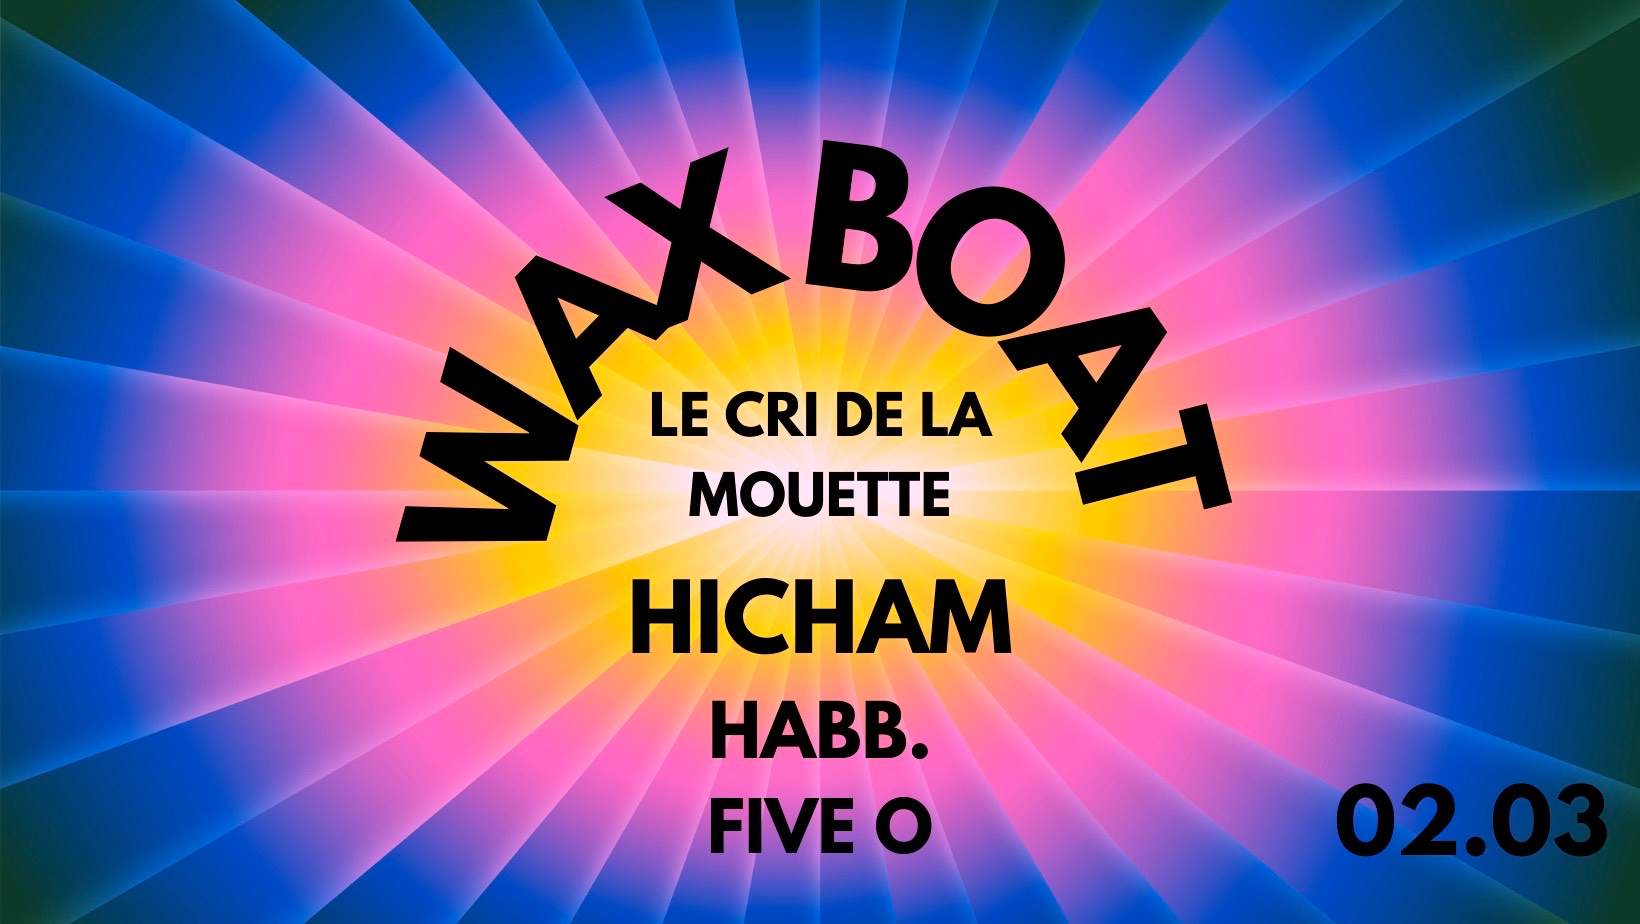 WAX Boat with Hicham - フライヤー表